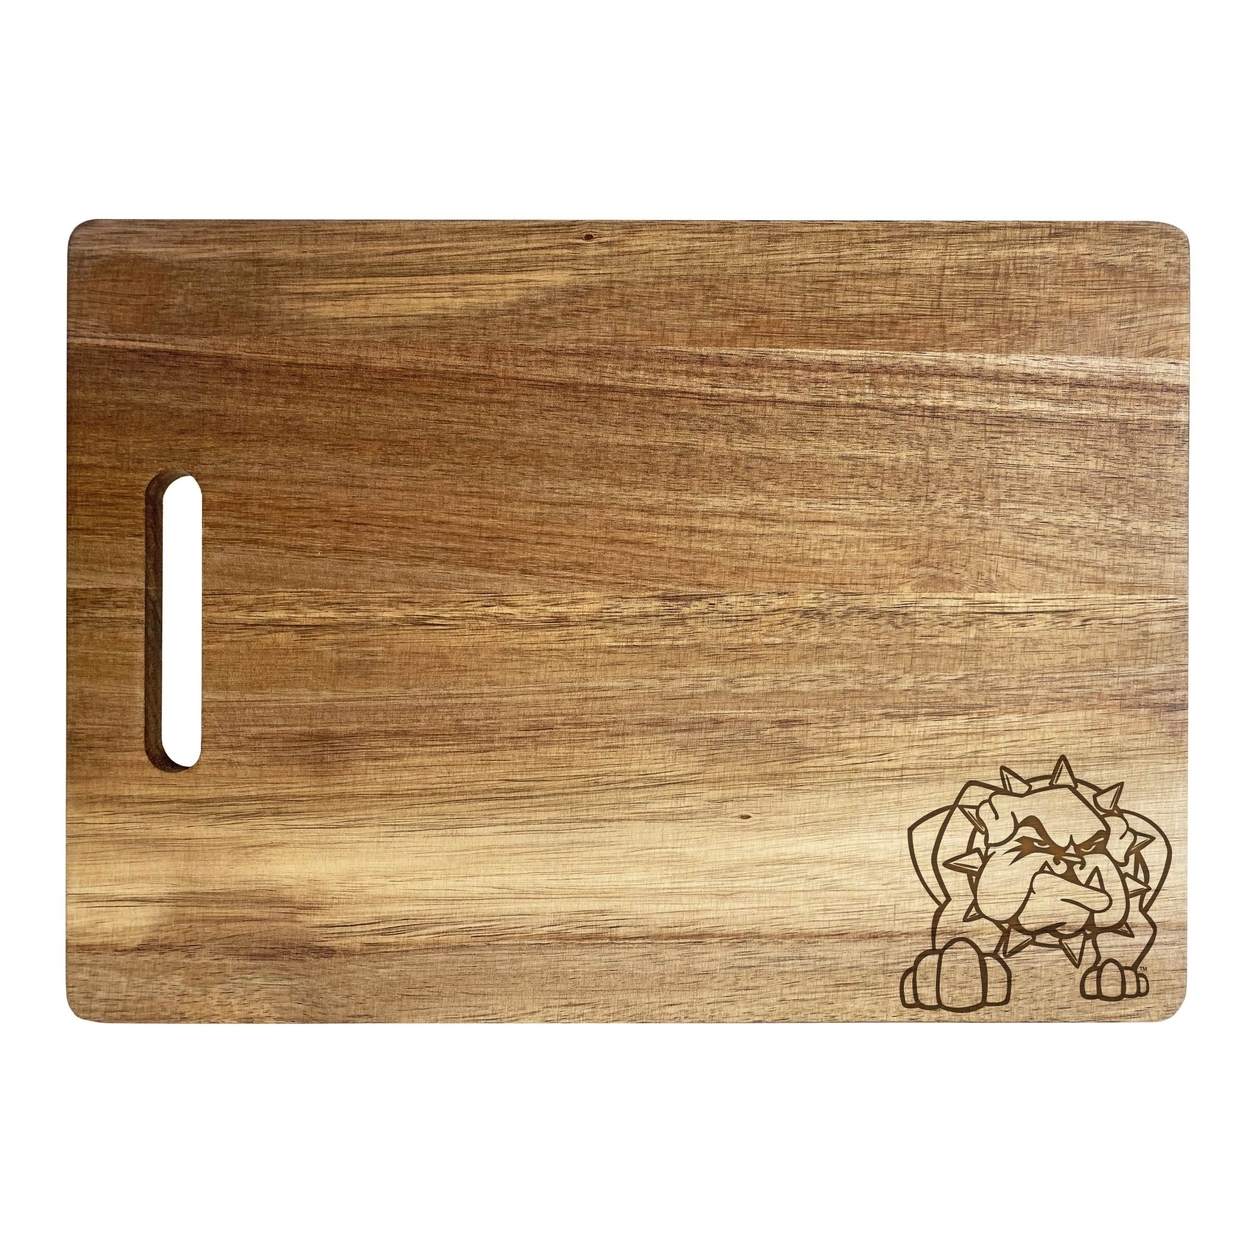 Southwestern Oklahoma State University Engraved Wooden Cutting Board 10 X 14 Acacia Wood - Small Engraving